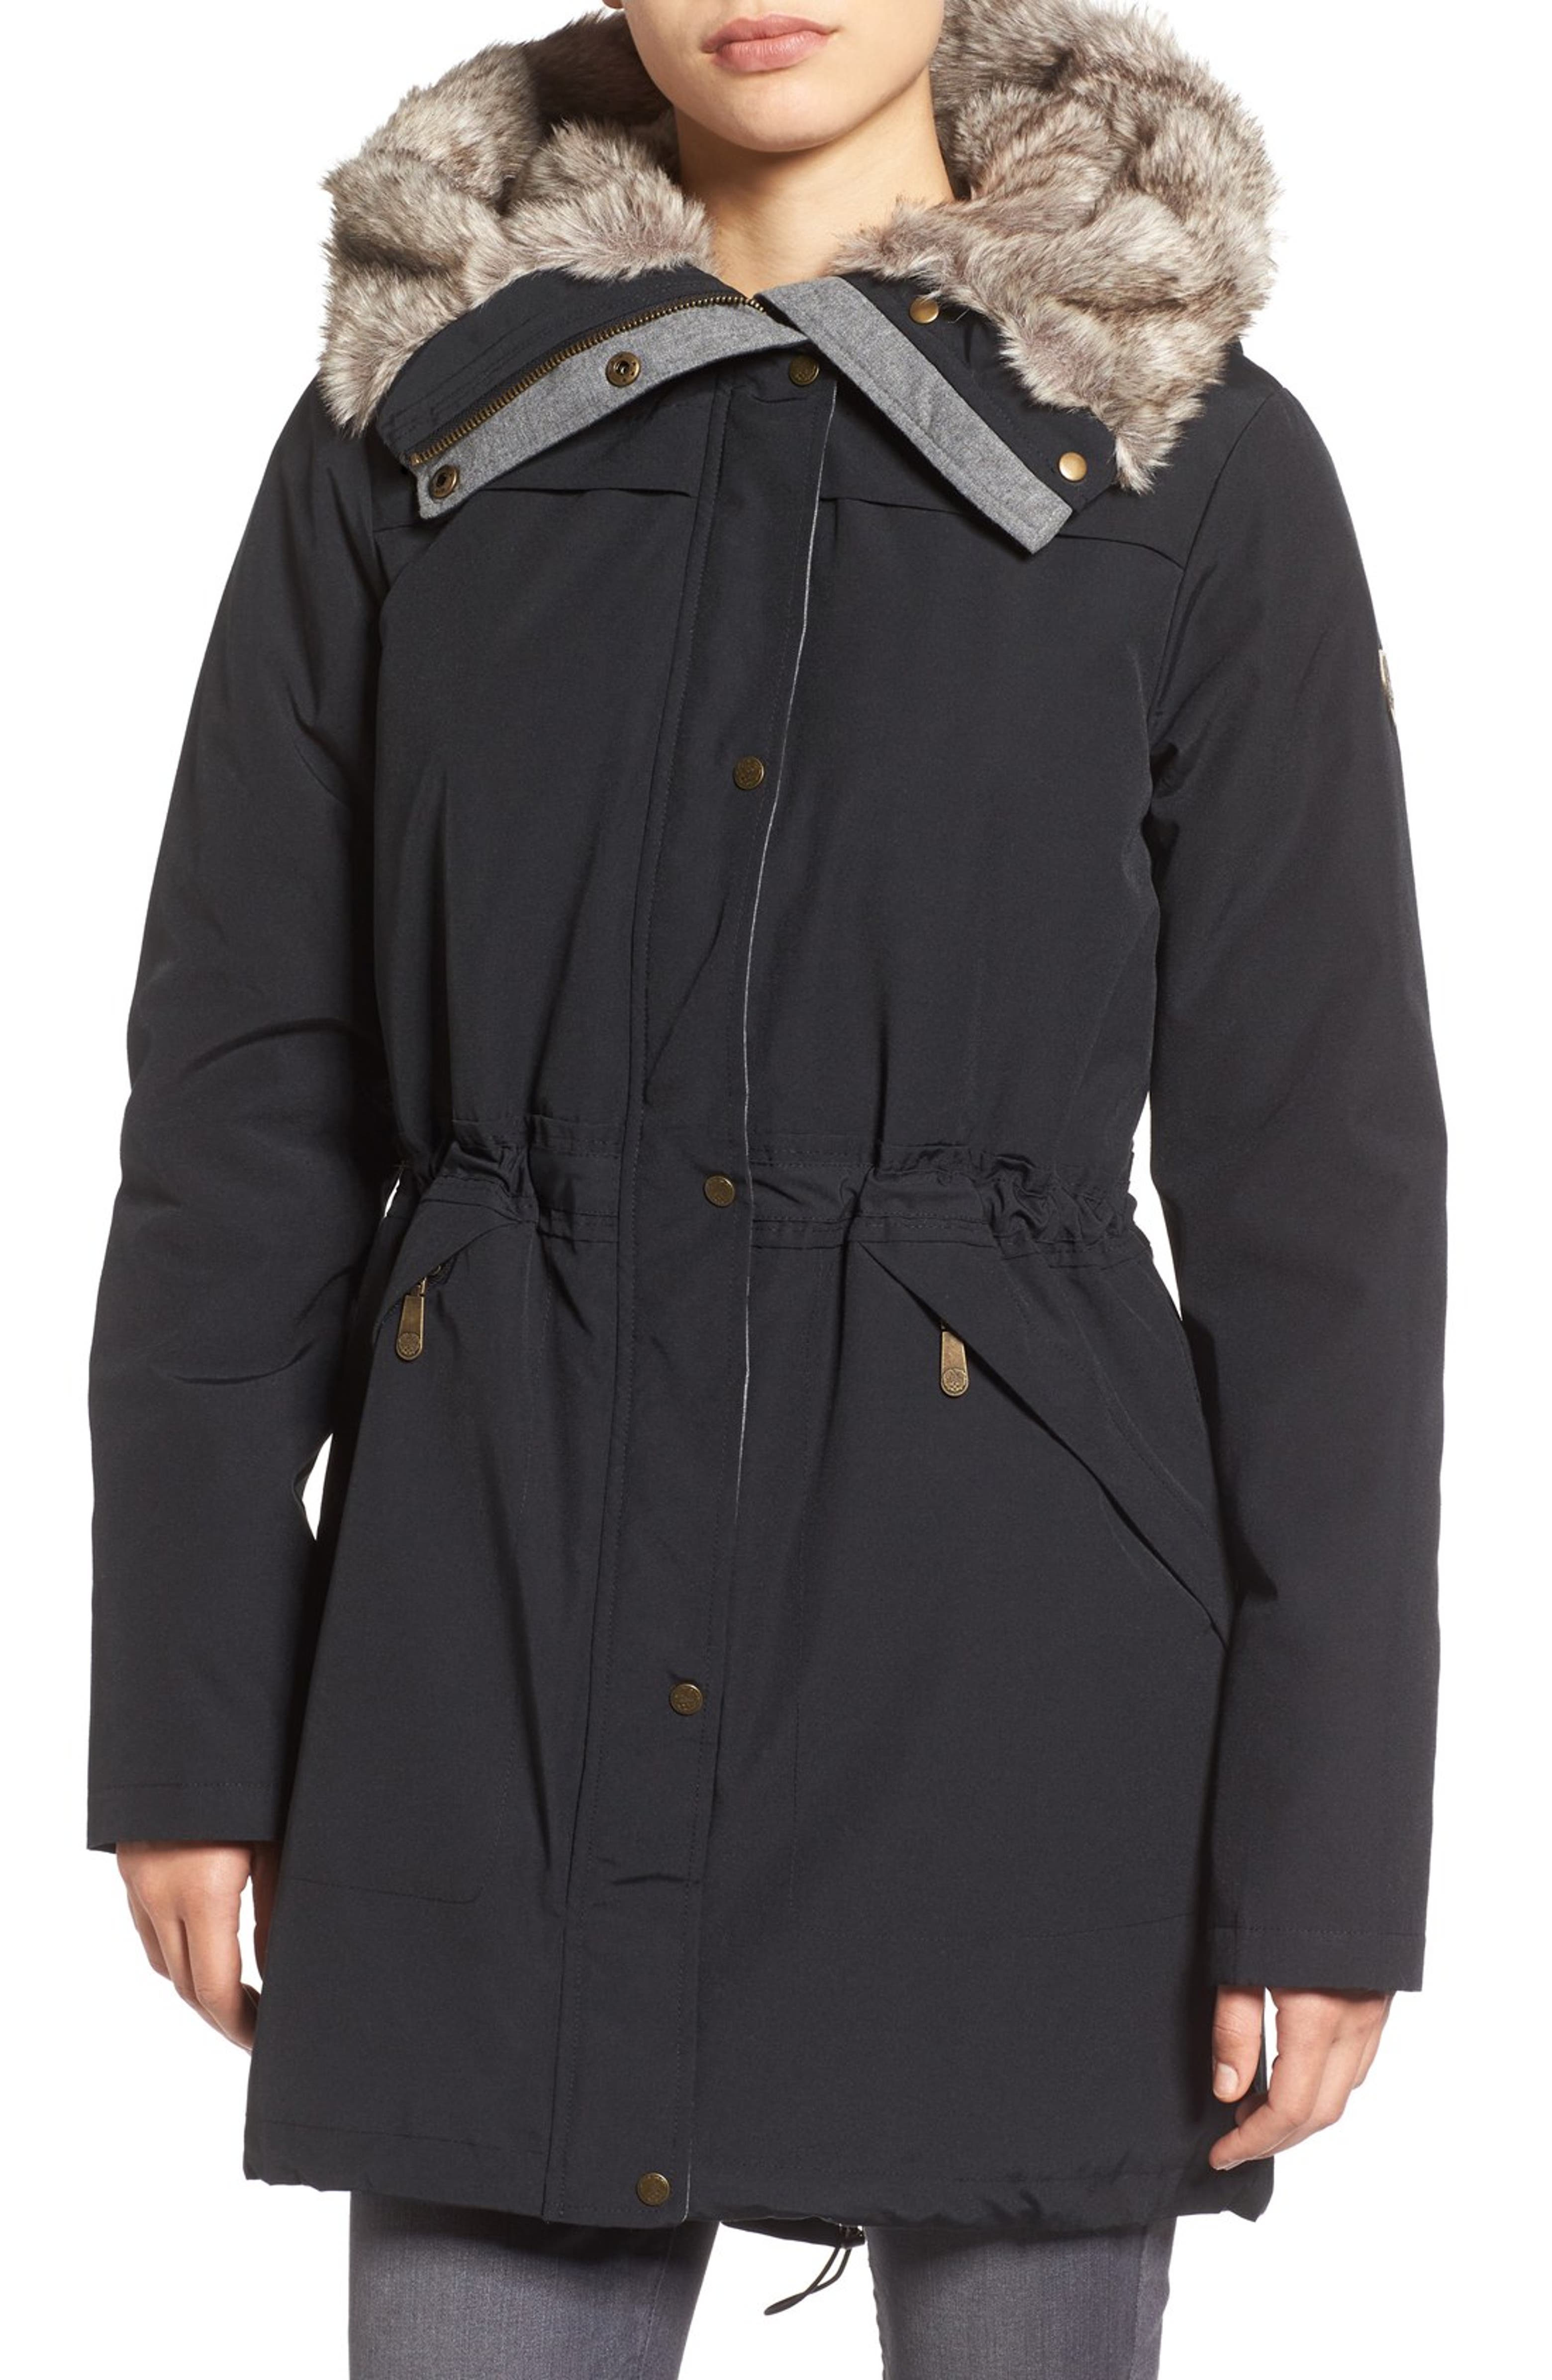 Vince Camuto Parka With Faux Fur Lined Hood | Nordstrom